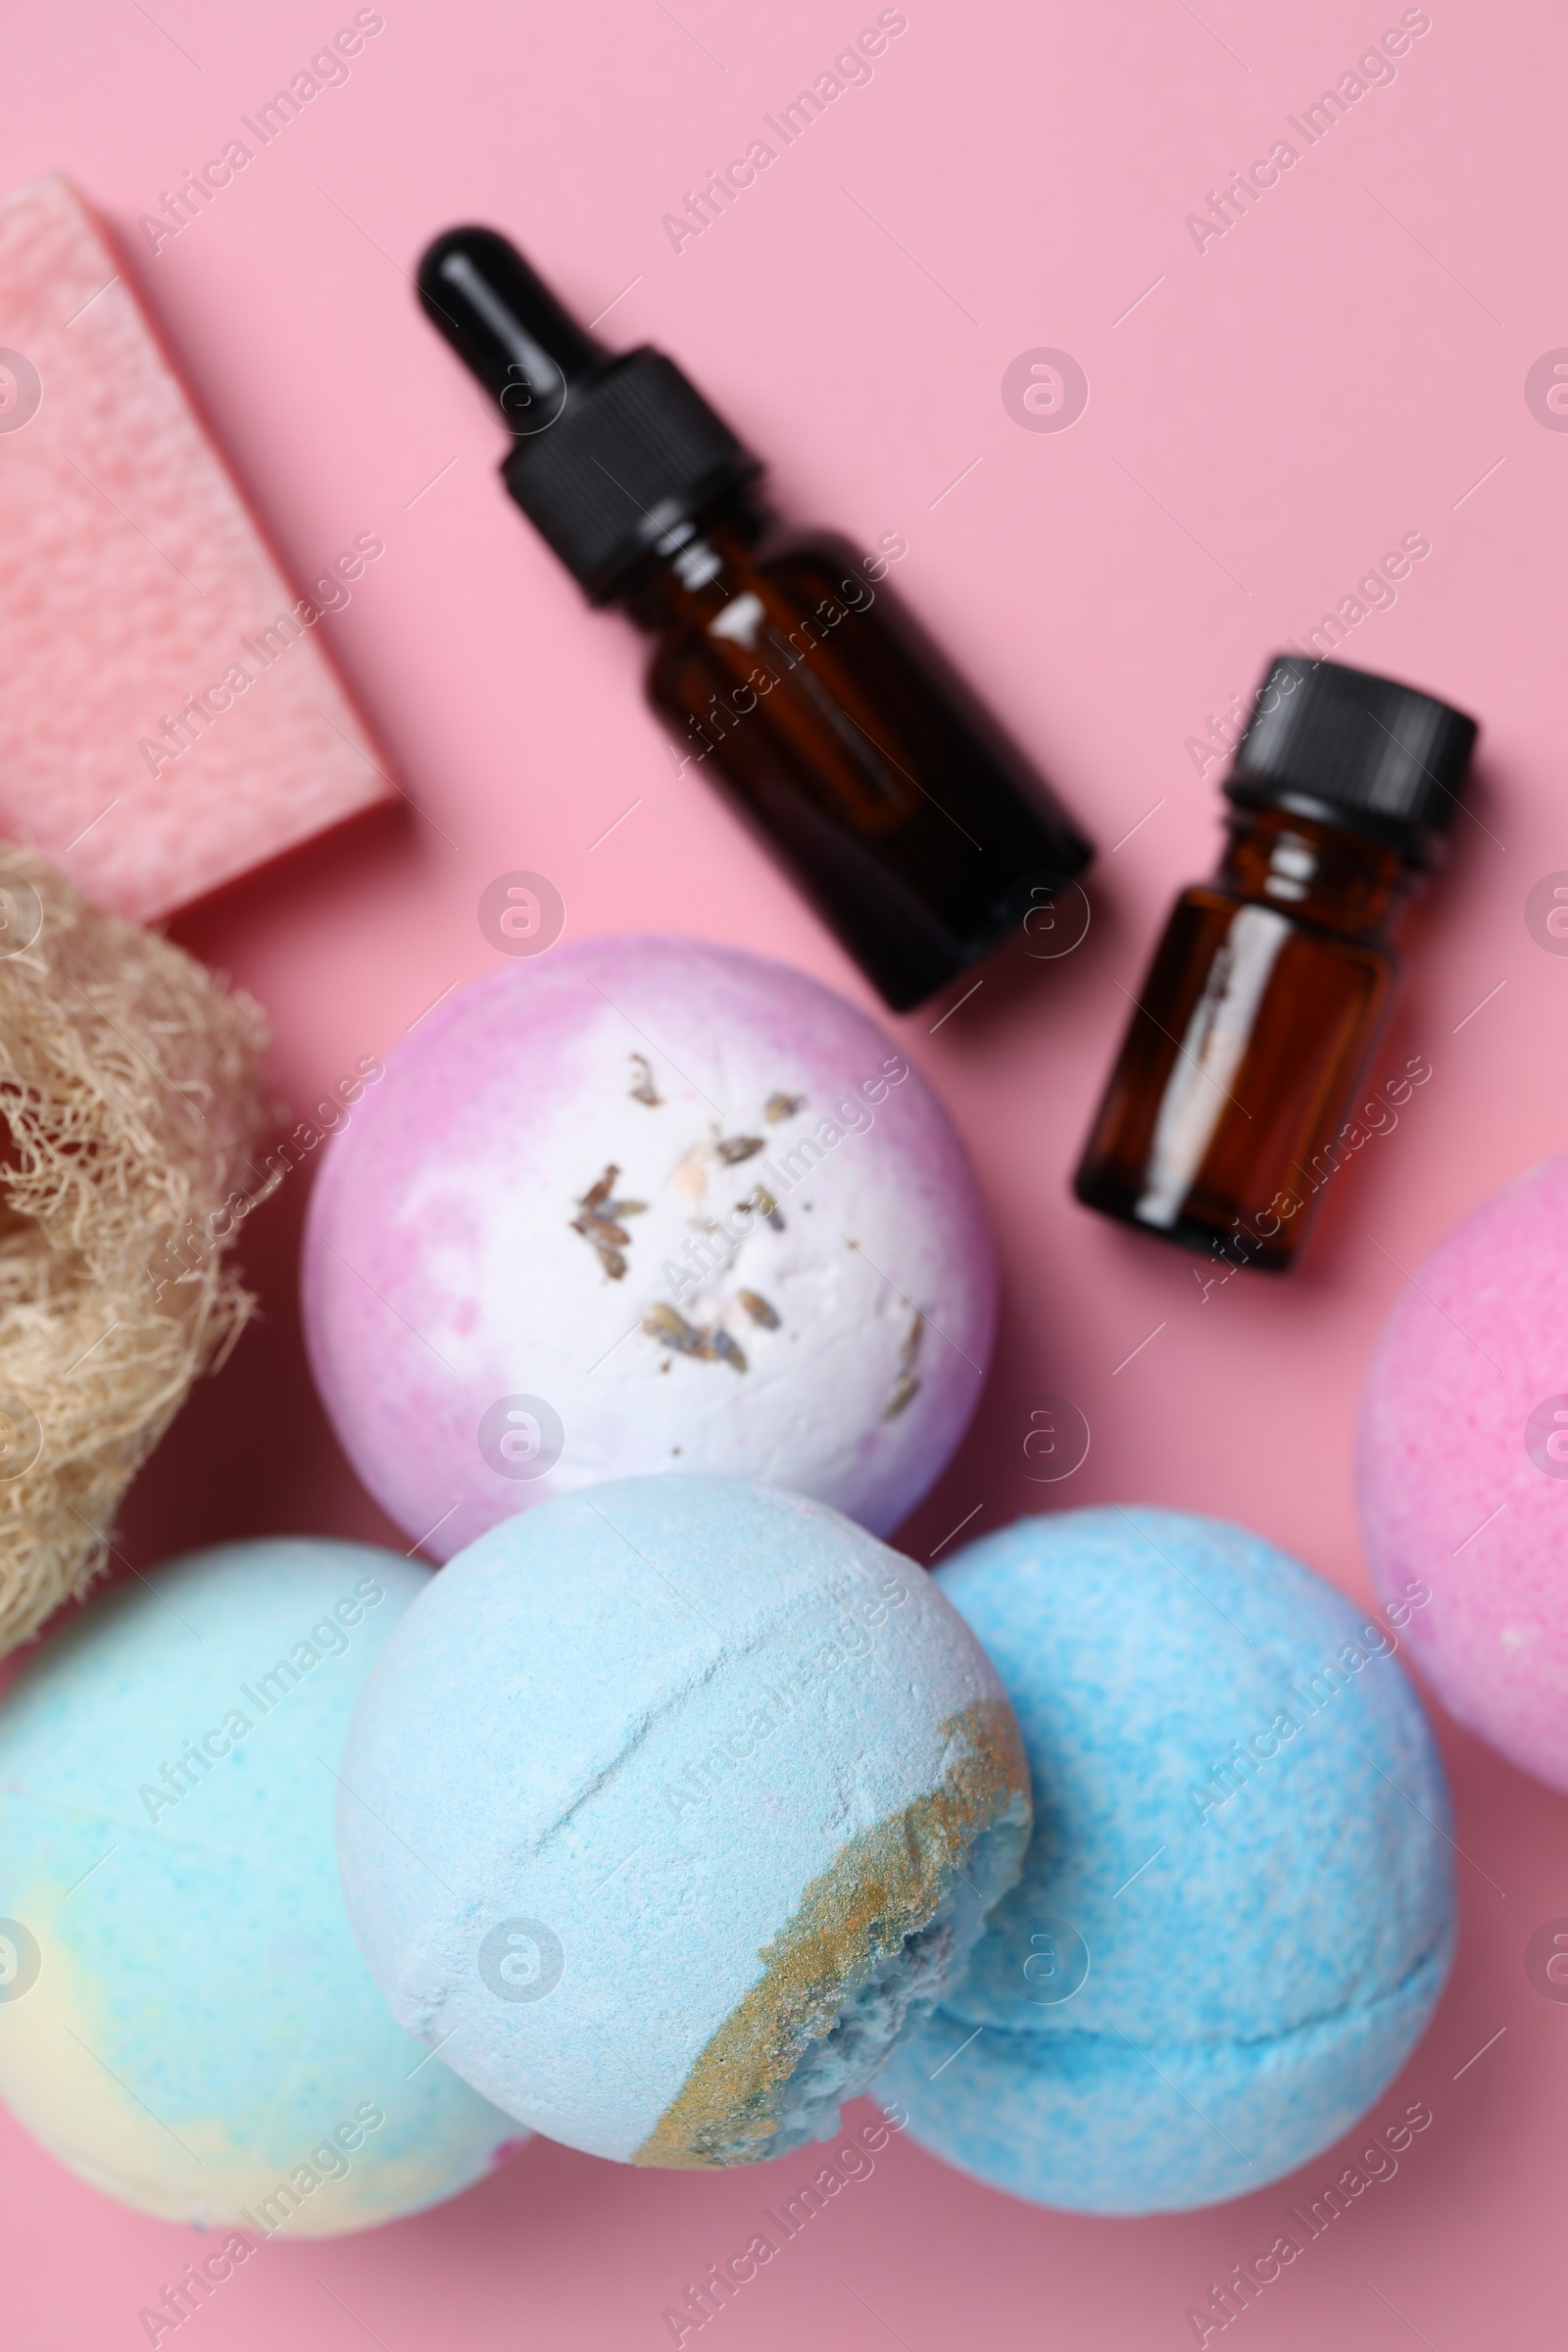 Photo of Bath bombs, loofah sponge, soap bar and bottles on pink background, flat lay